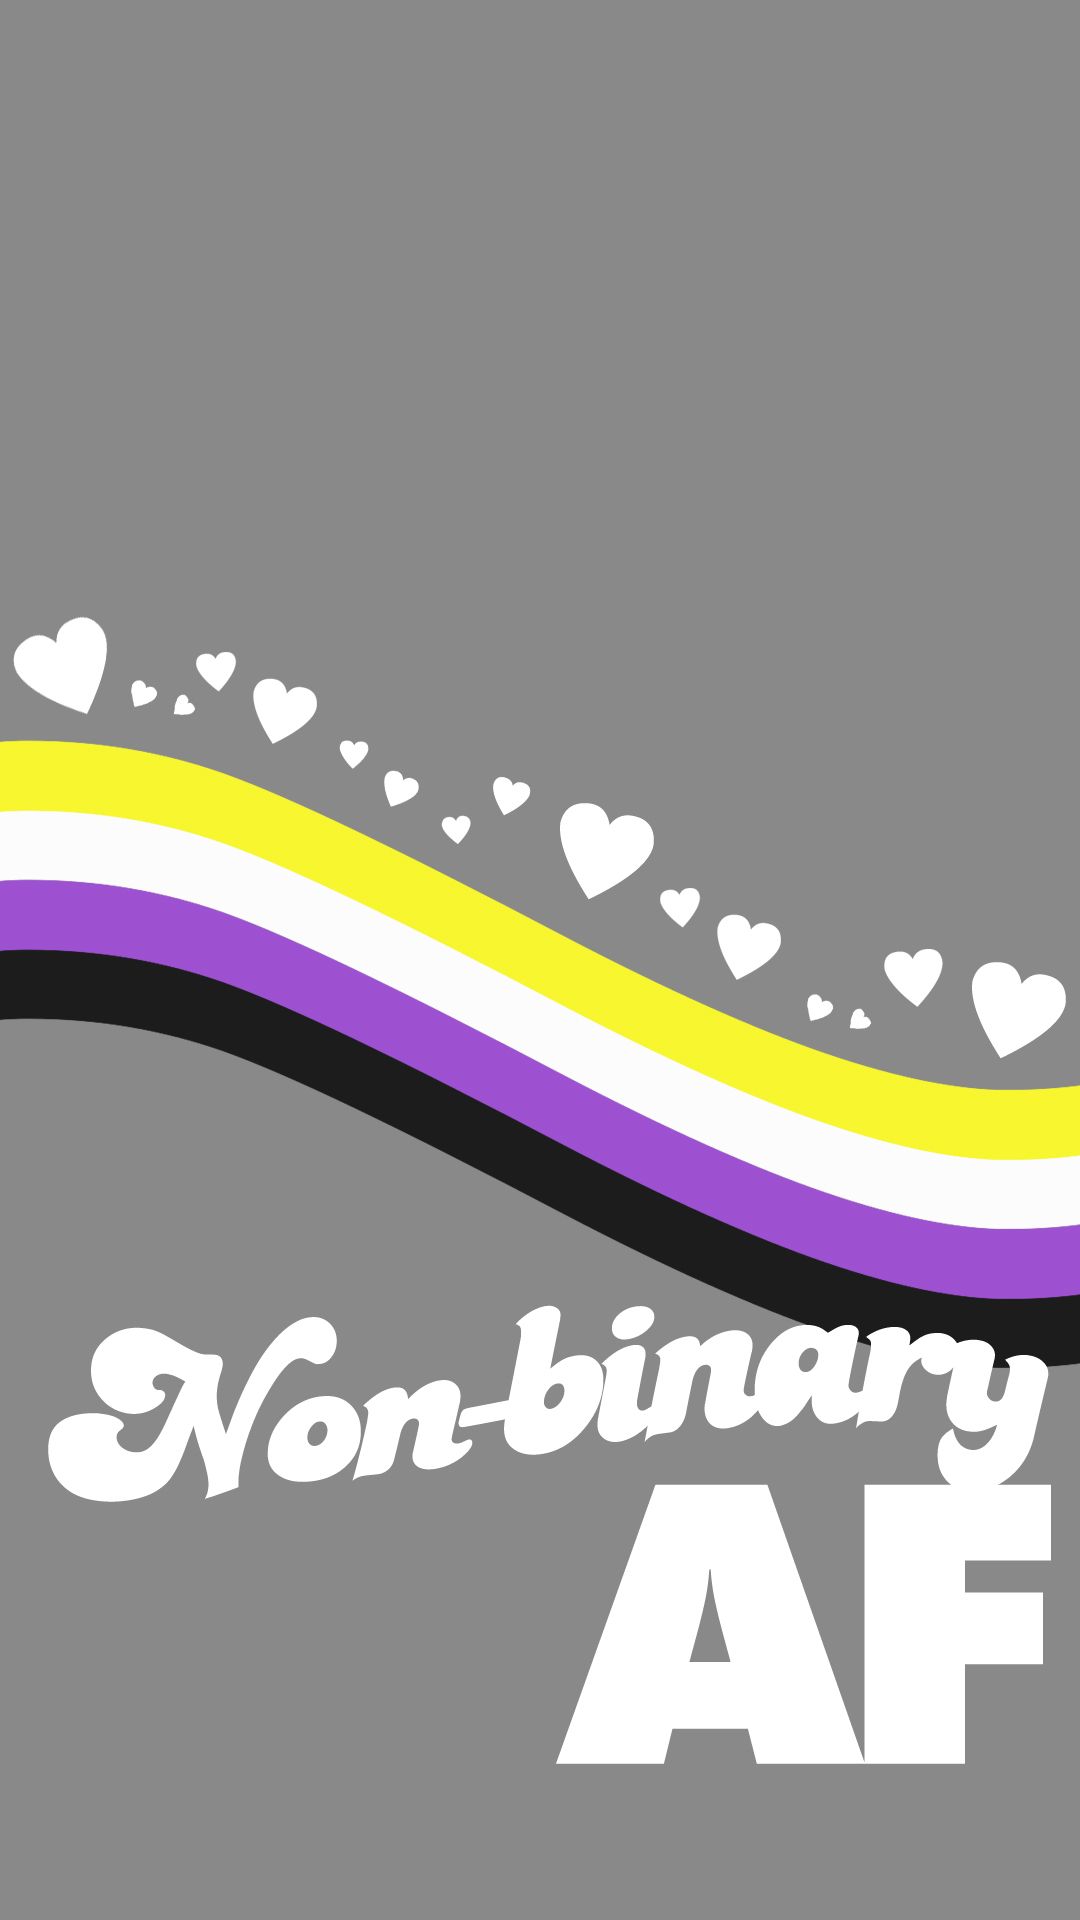 Bisexual Non Binary Wallpapers Wallpaper Cave